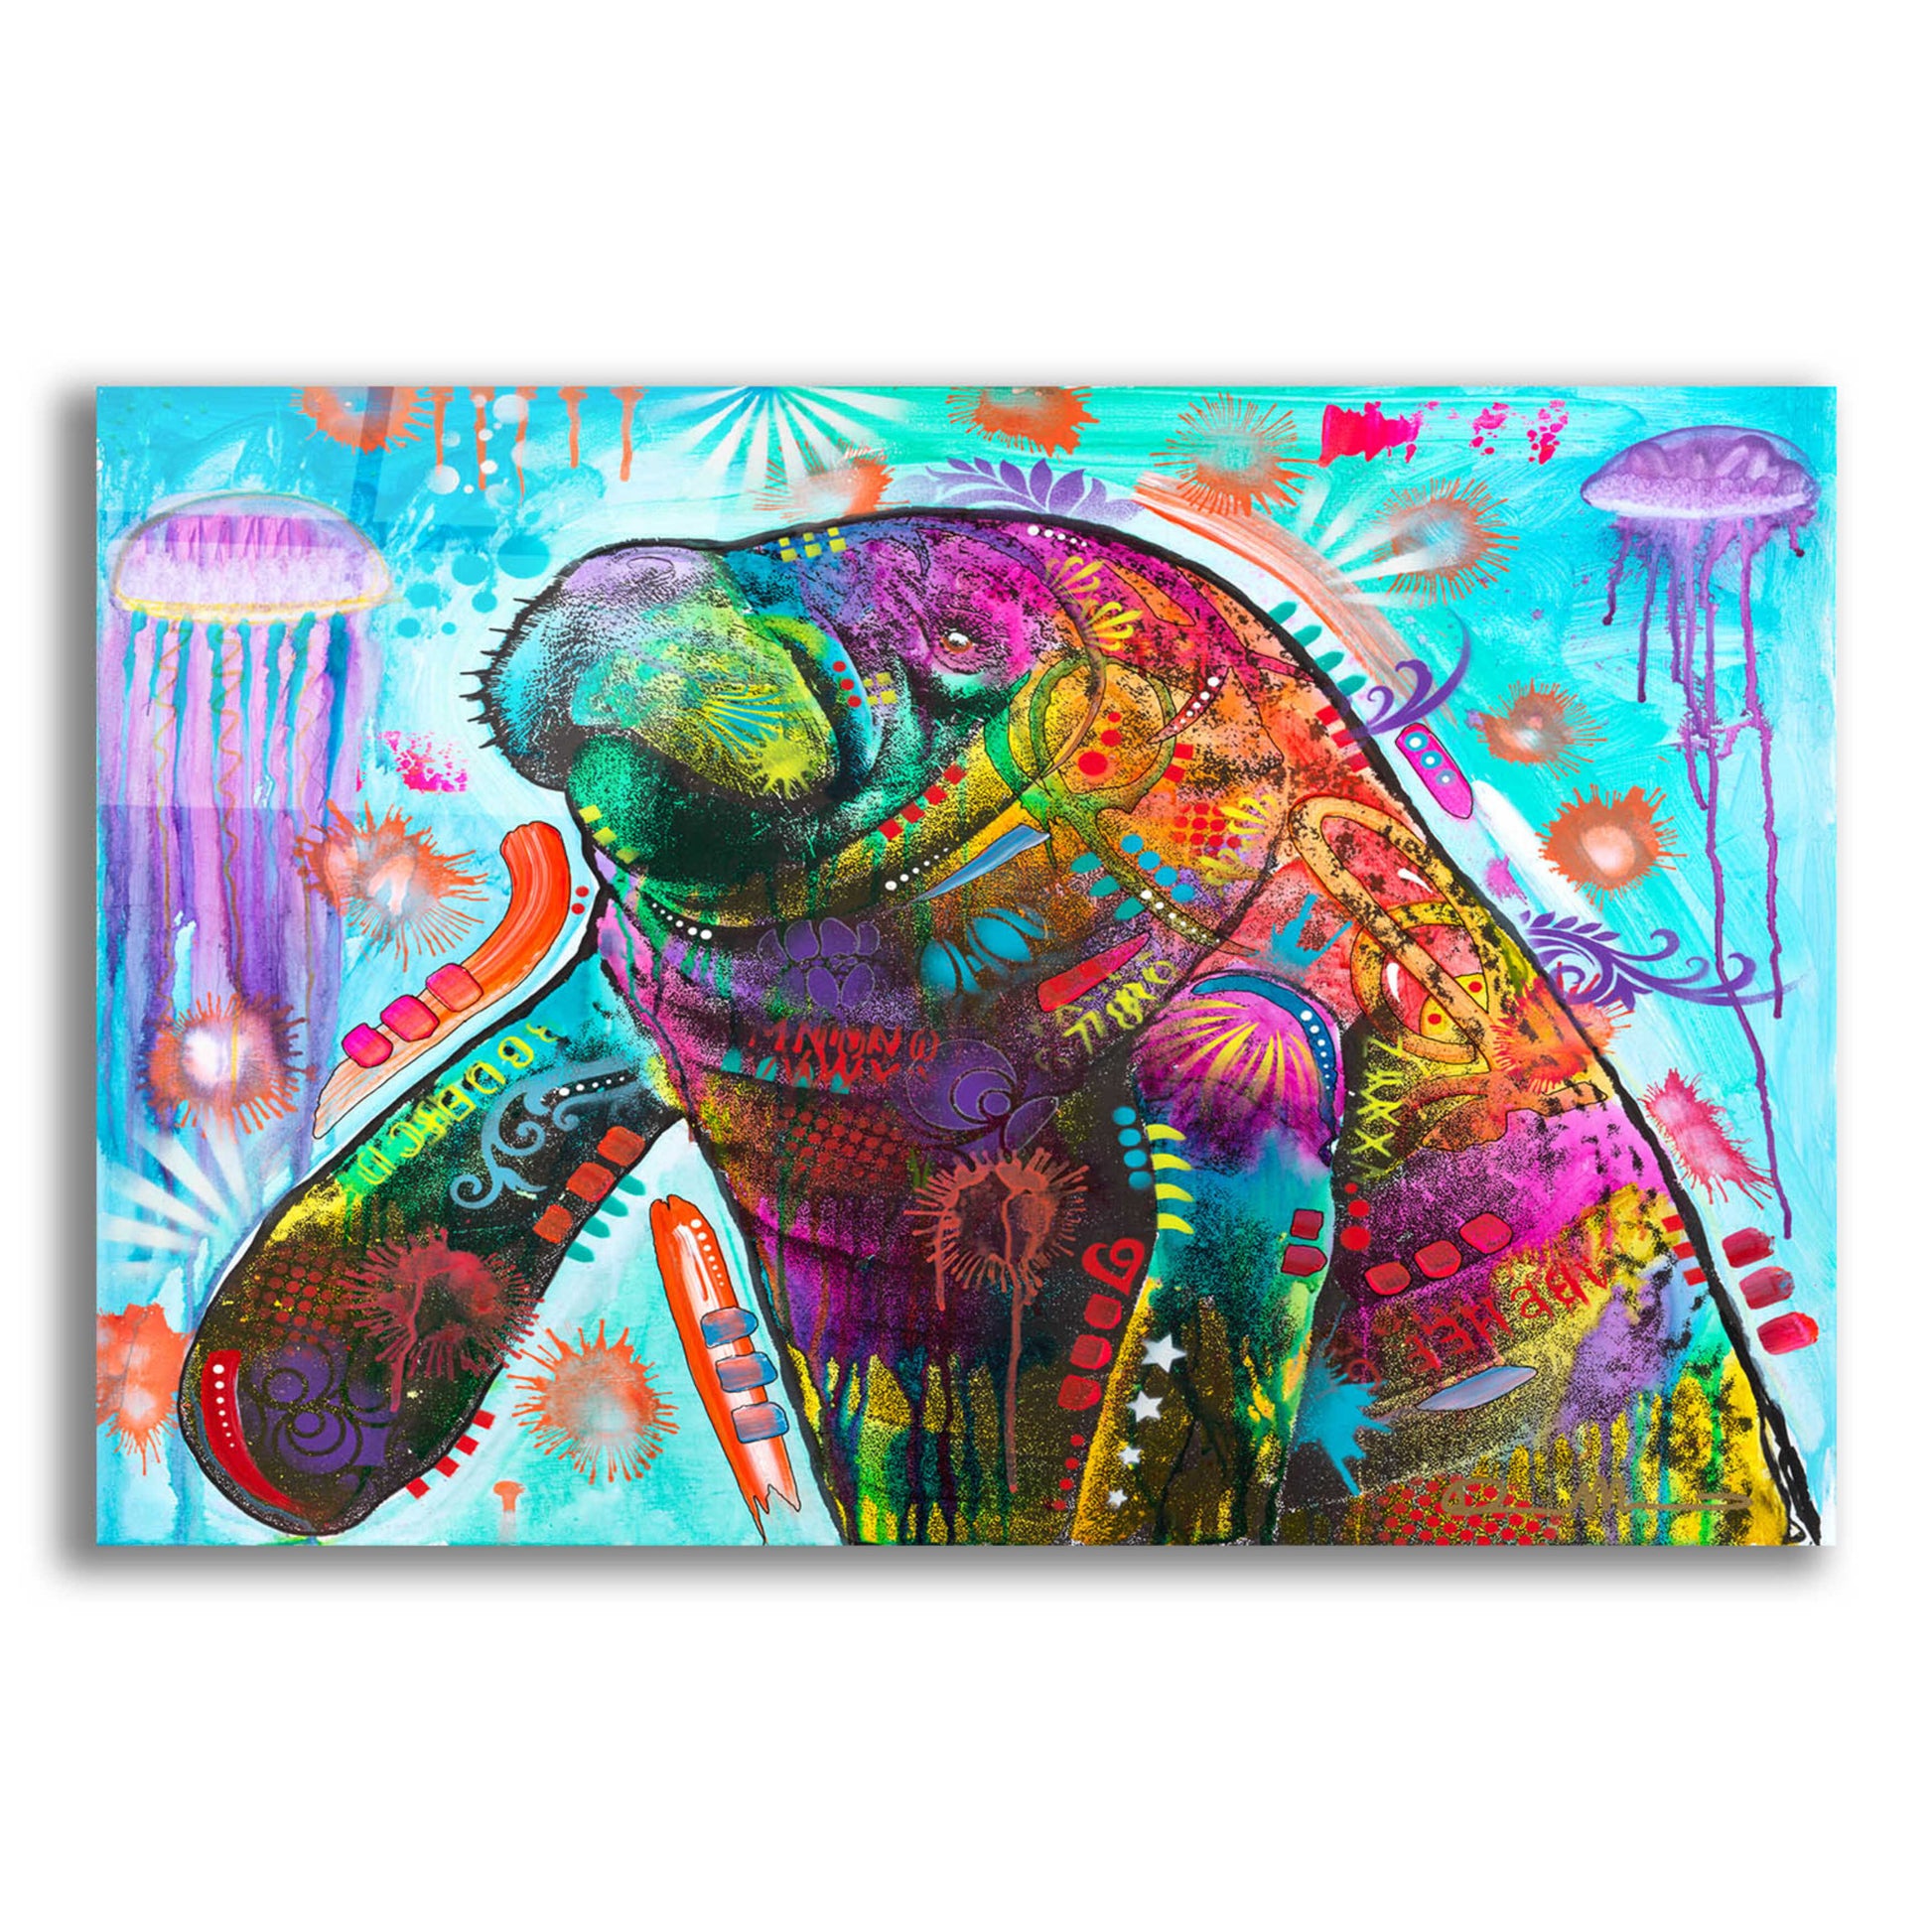 Epic Art 'Manatee' by Dean Russo, Acrylic Glass Wall Art,24x16